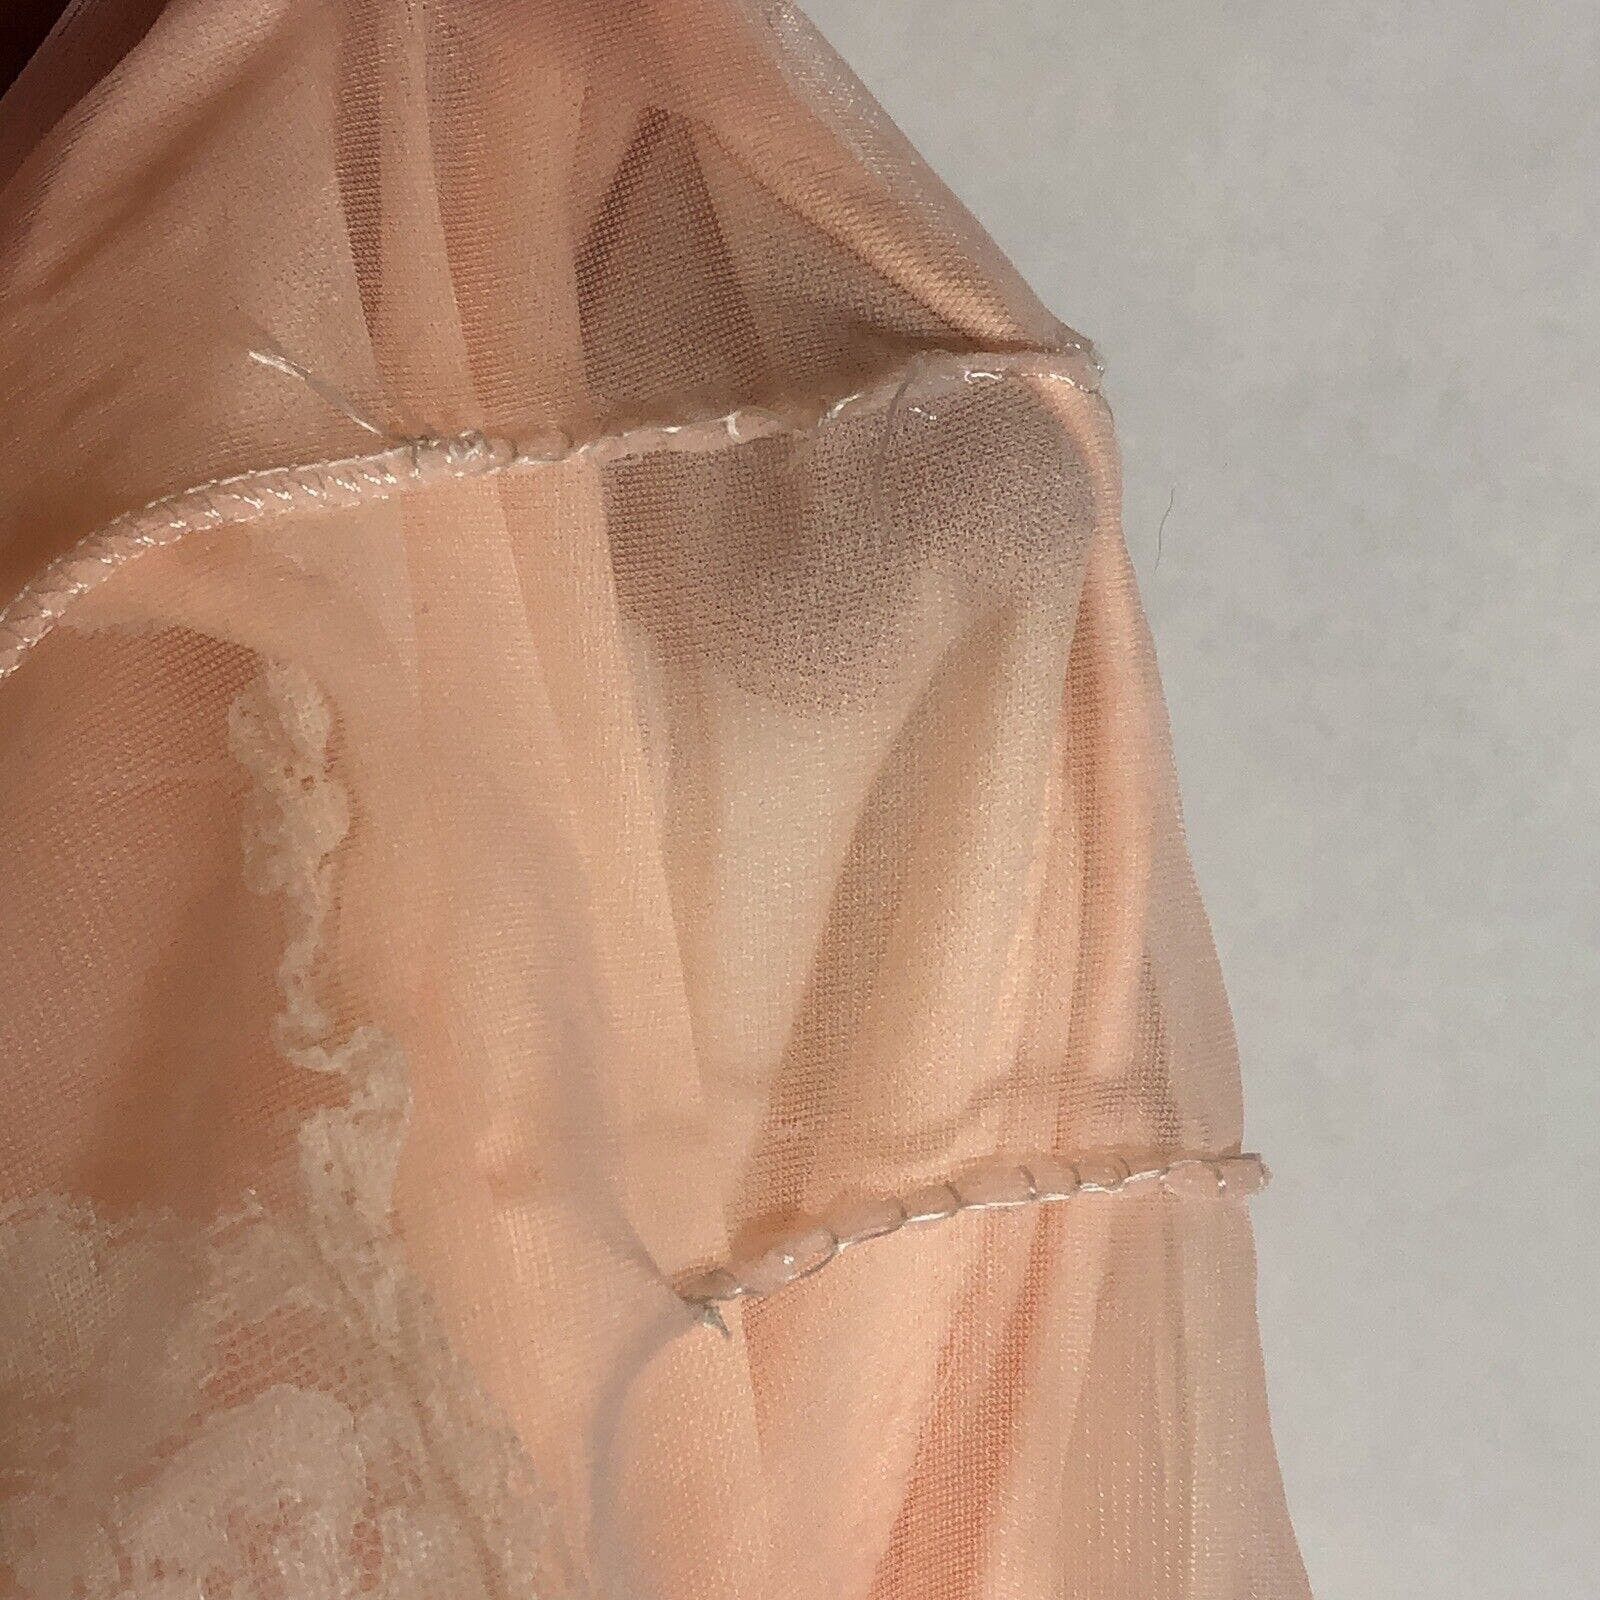 Vintage Vintage Peach and Pink Lace and Chiffon NightGown Dress S Size S / US 4 / IT 40 - 8 Thumbnail